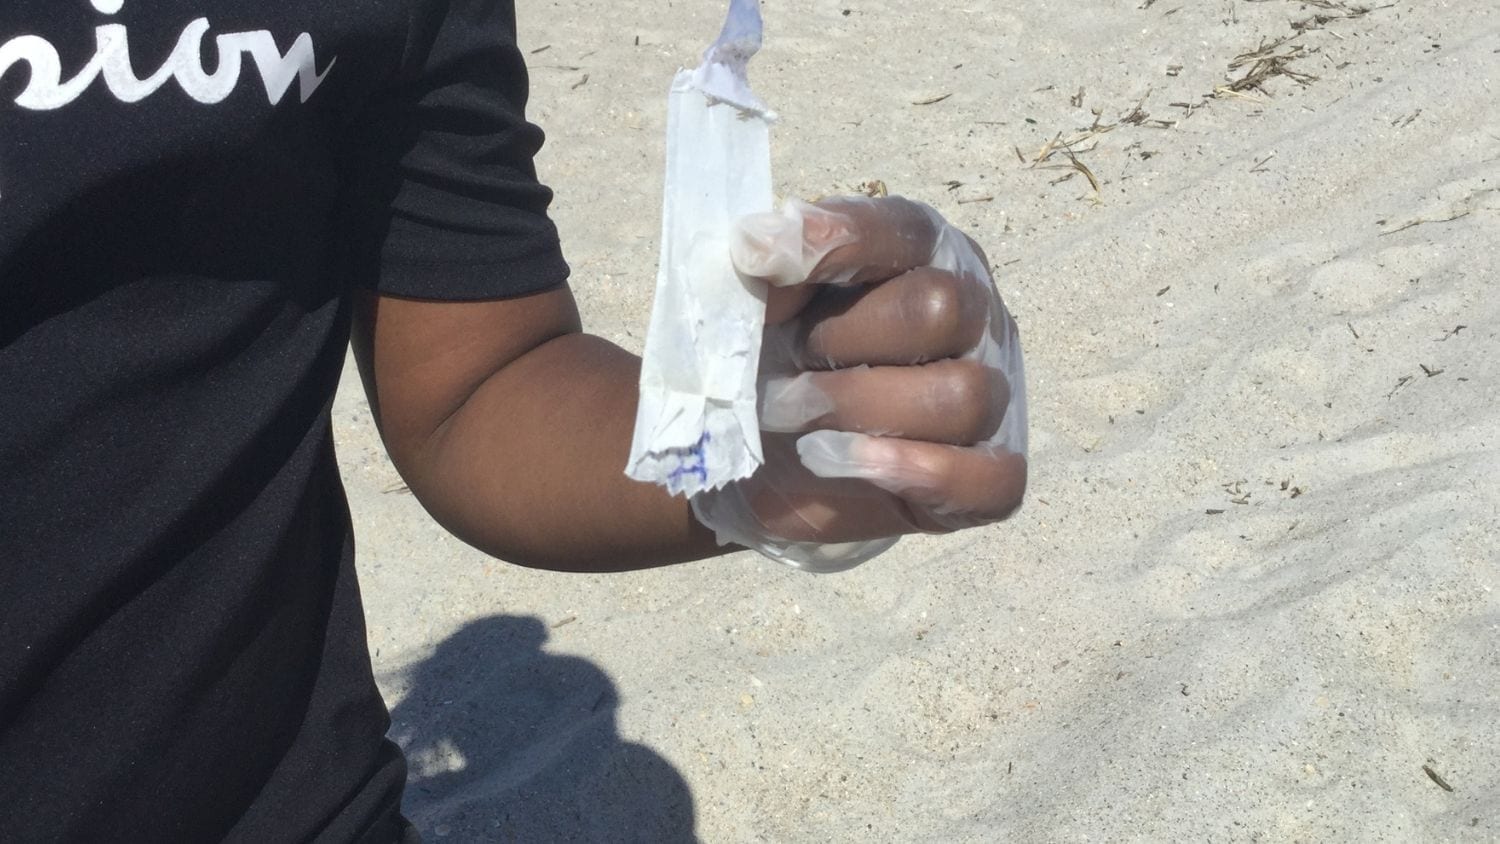 Students picked up trash at the beach in New Hanover County. Credit: Jenna Hartley